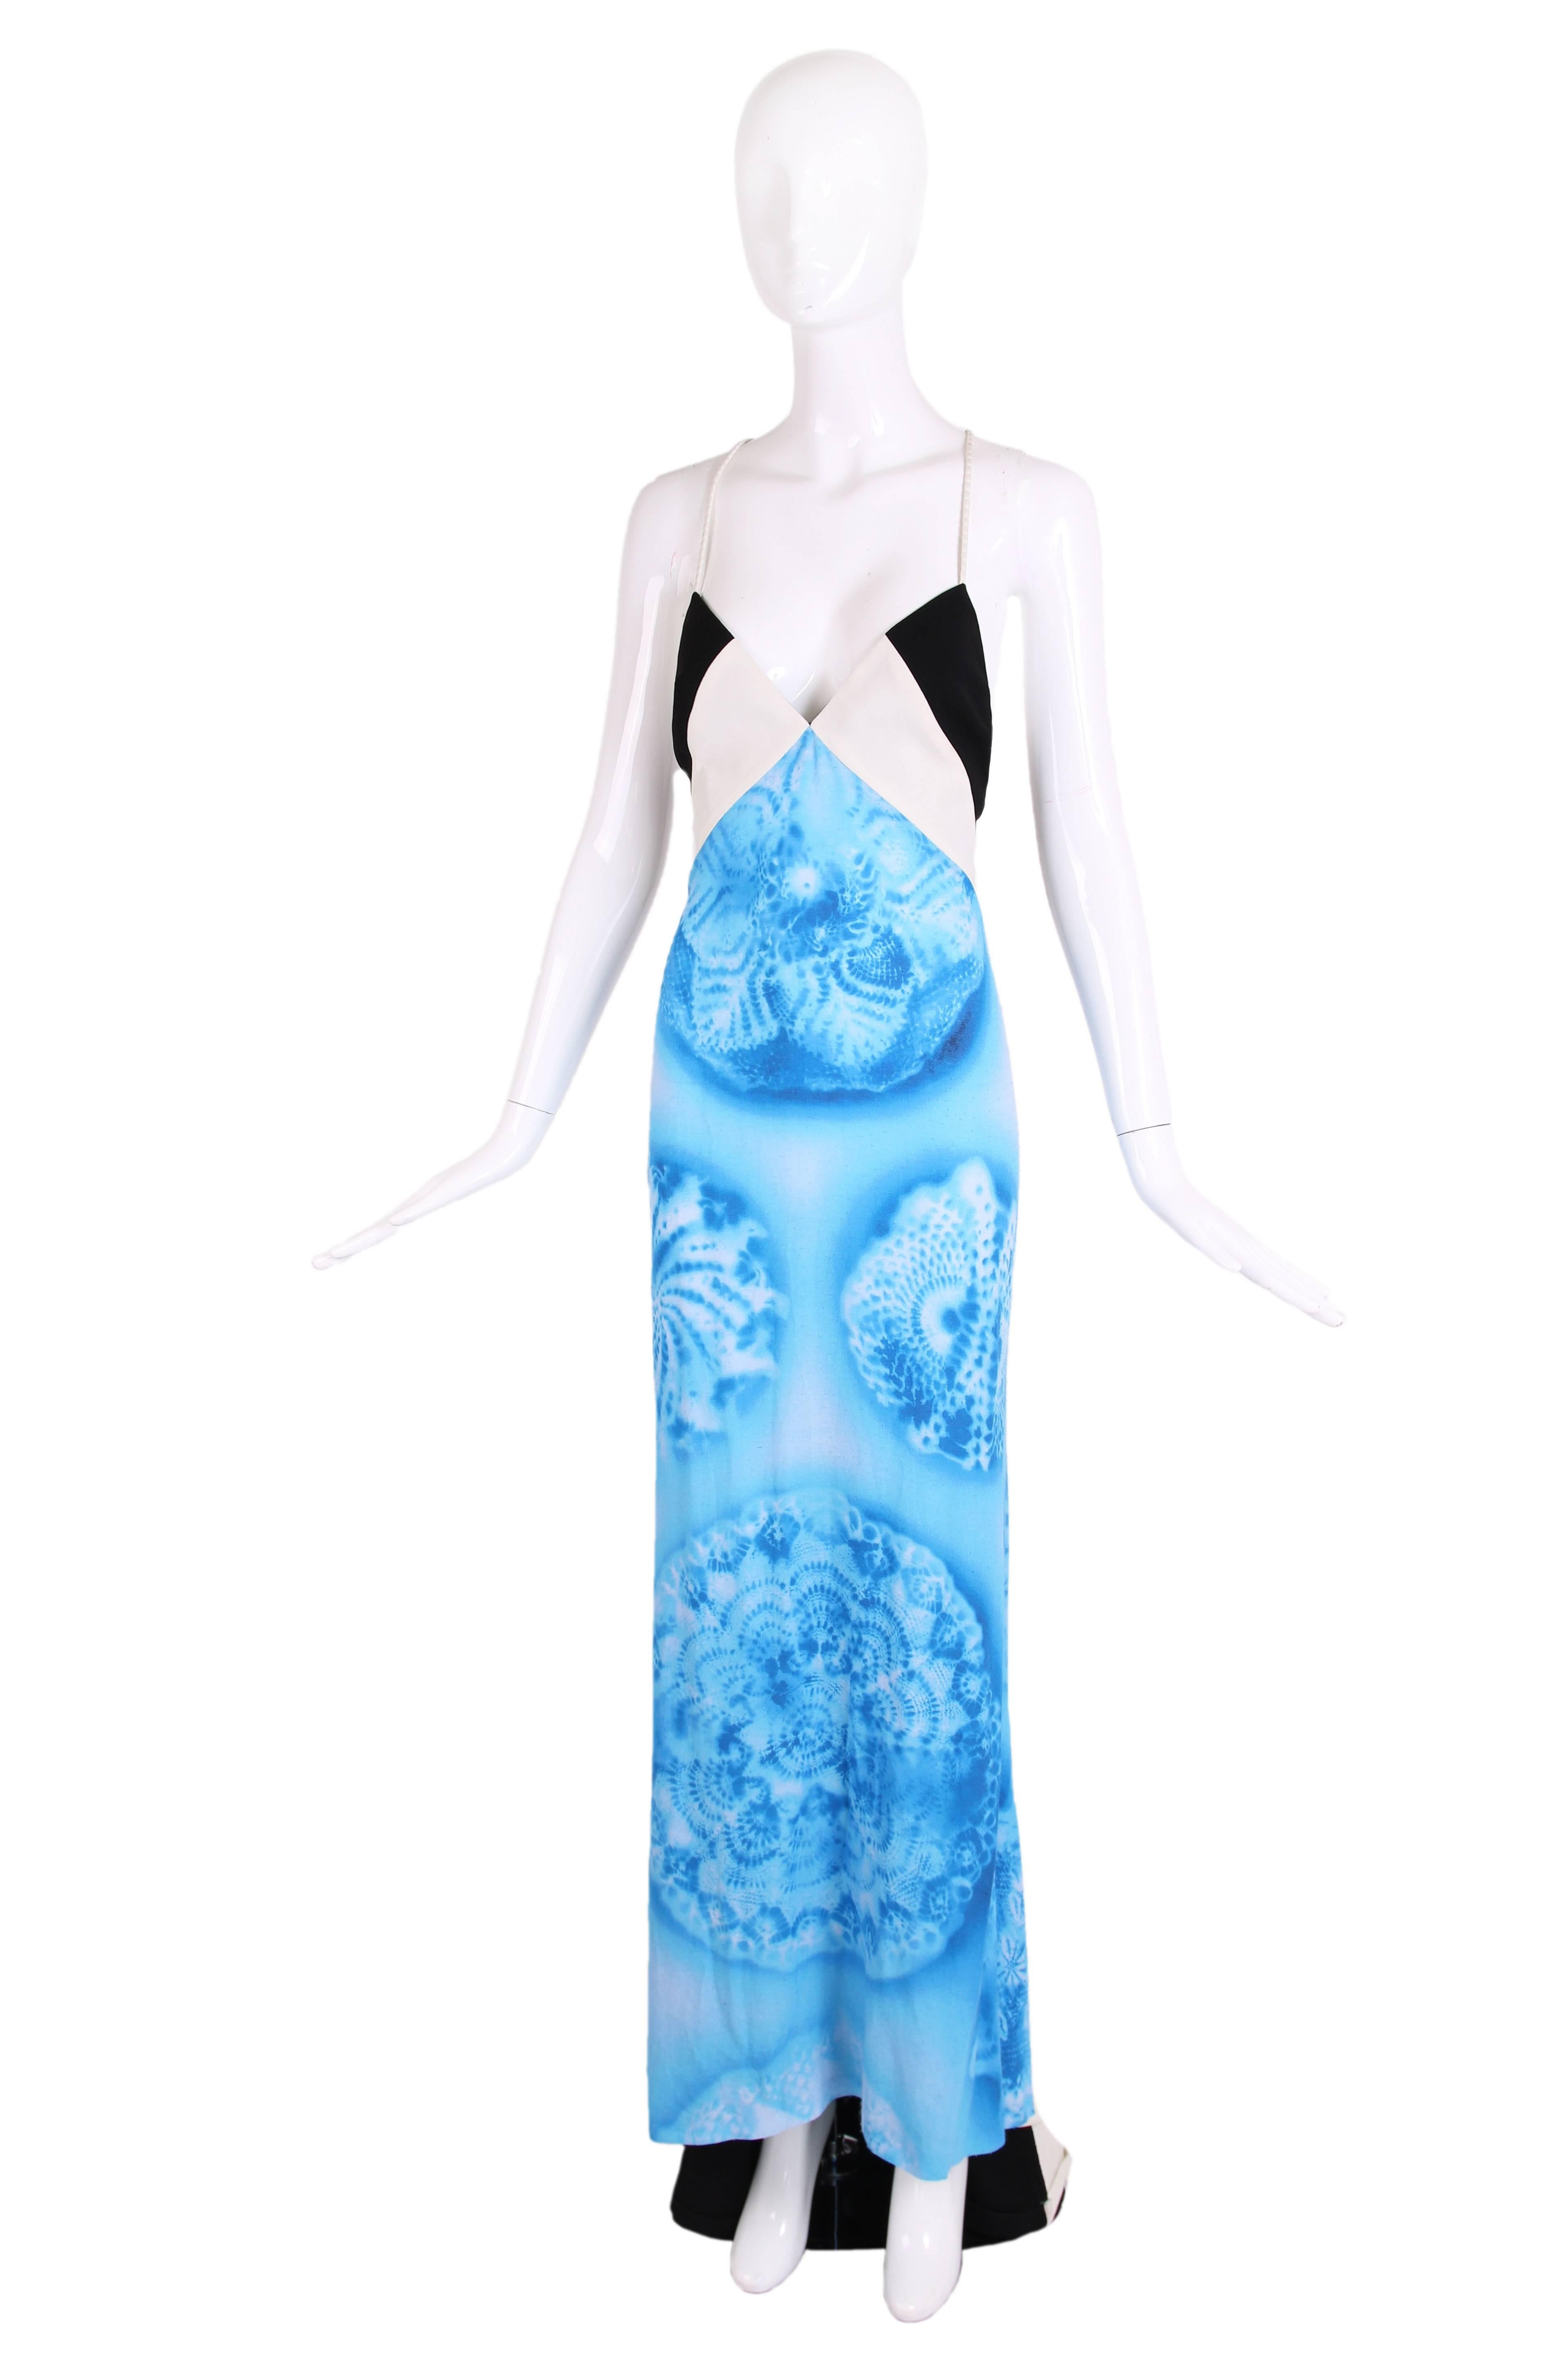 2008 Jean Paul Gaultier deep v-neck blue ombre batik spaghetti strap gown in crepe with black and white color block back culminating in a train. Zipper closure up back. In excellent condition with some minor pilling to some areas of the blue batik